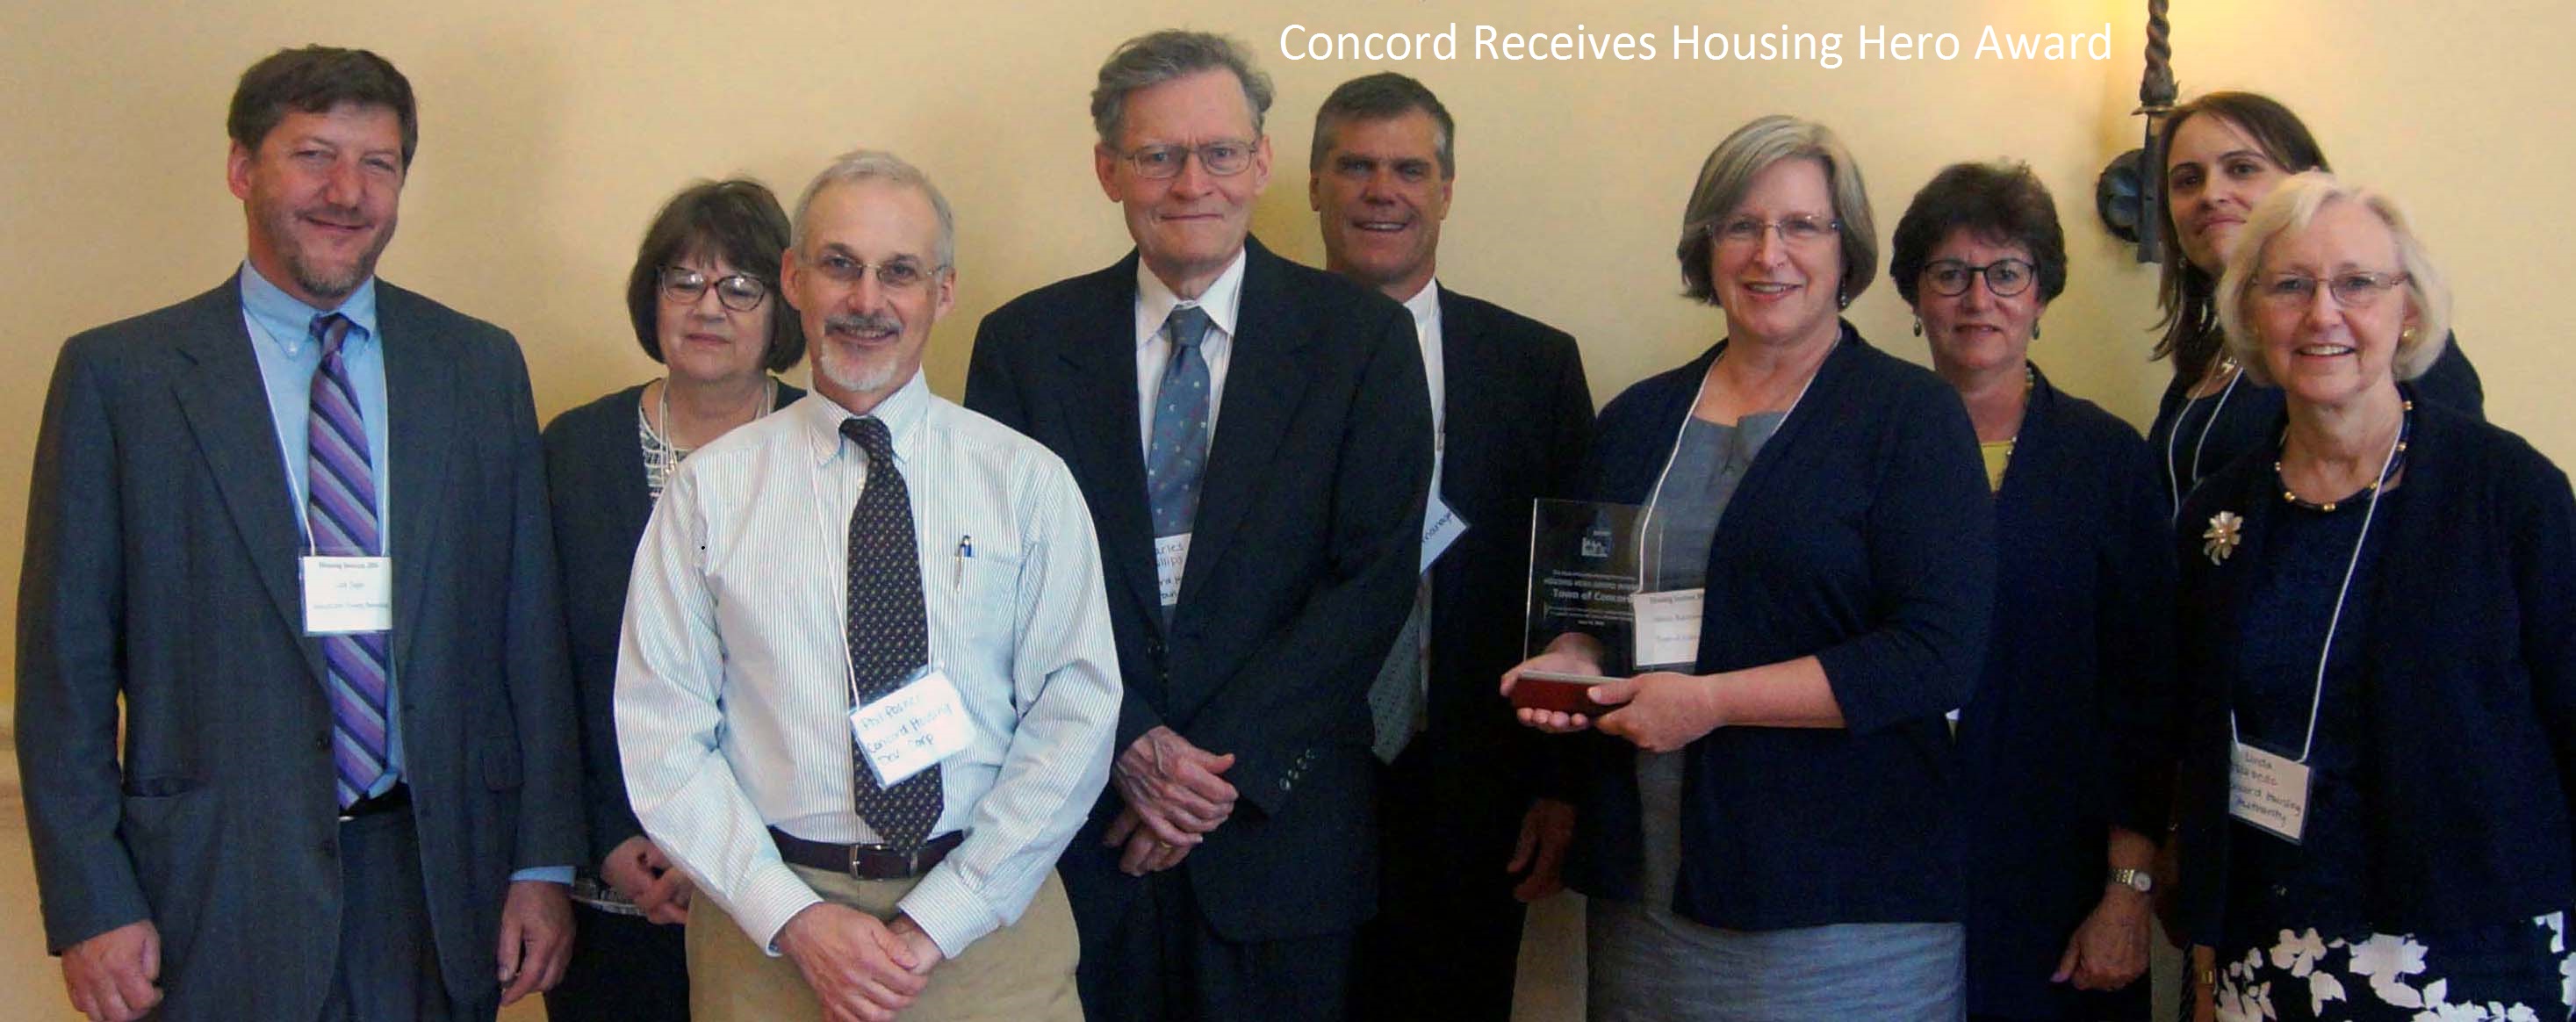 Concord Housing Hero Award from MHP